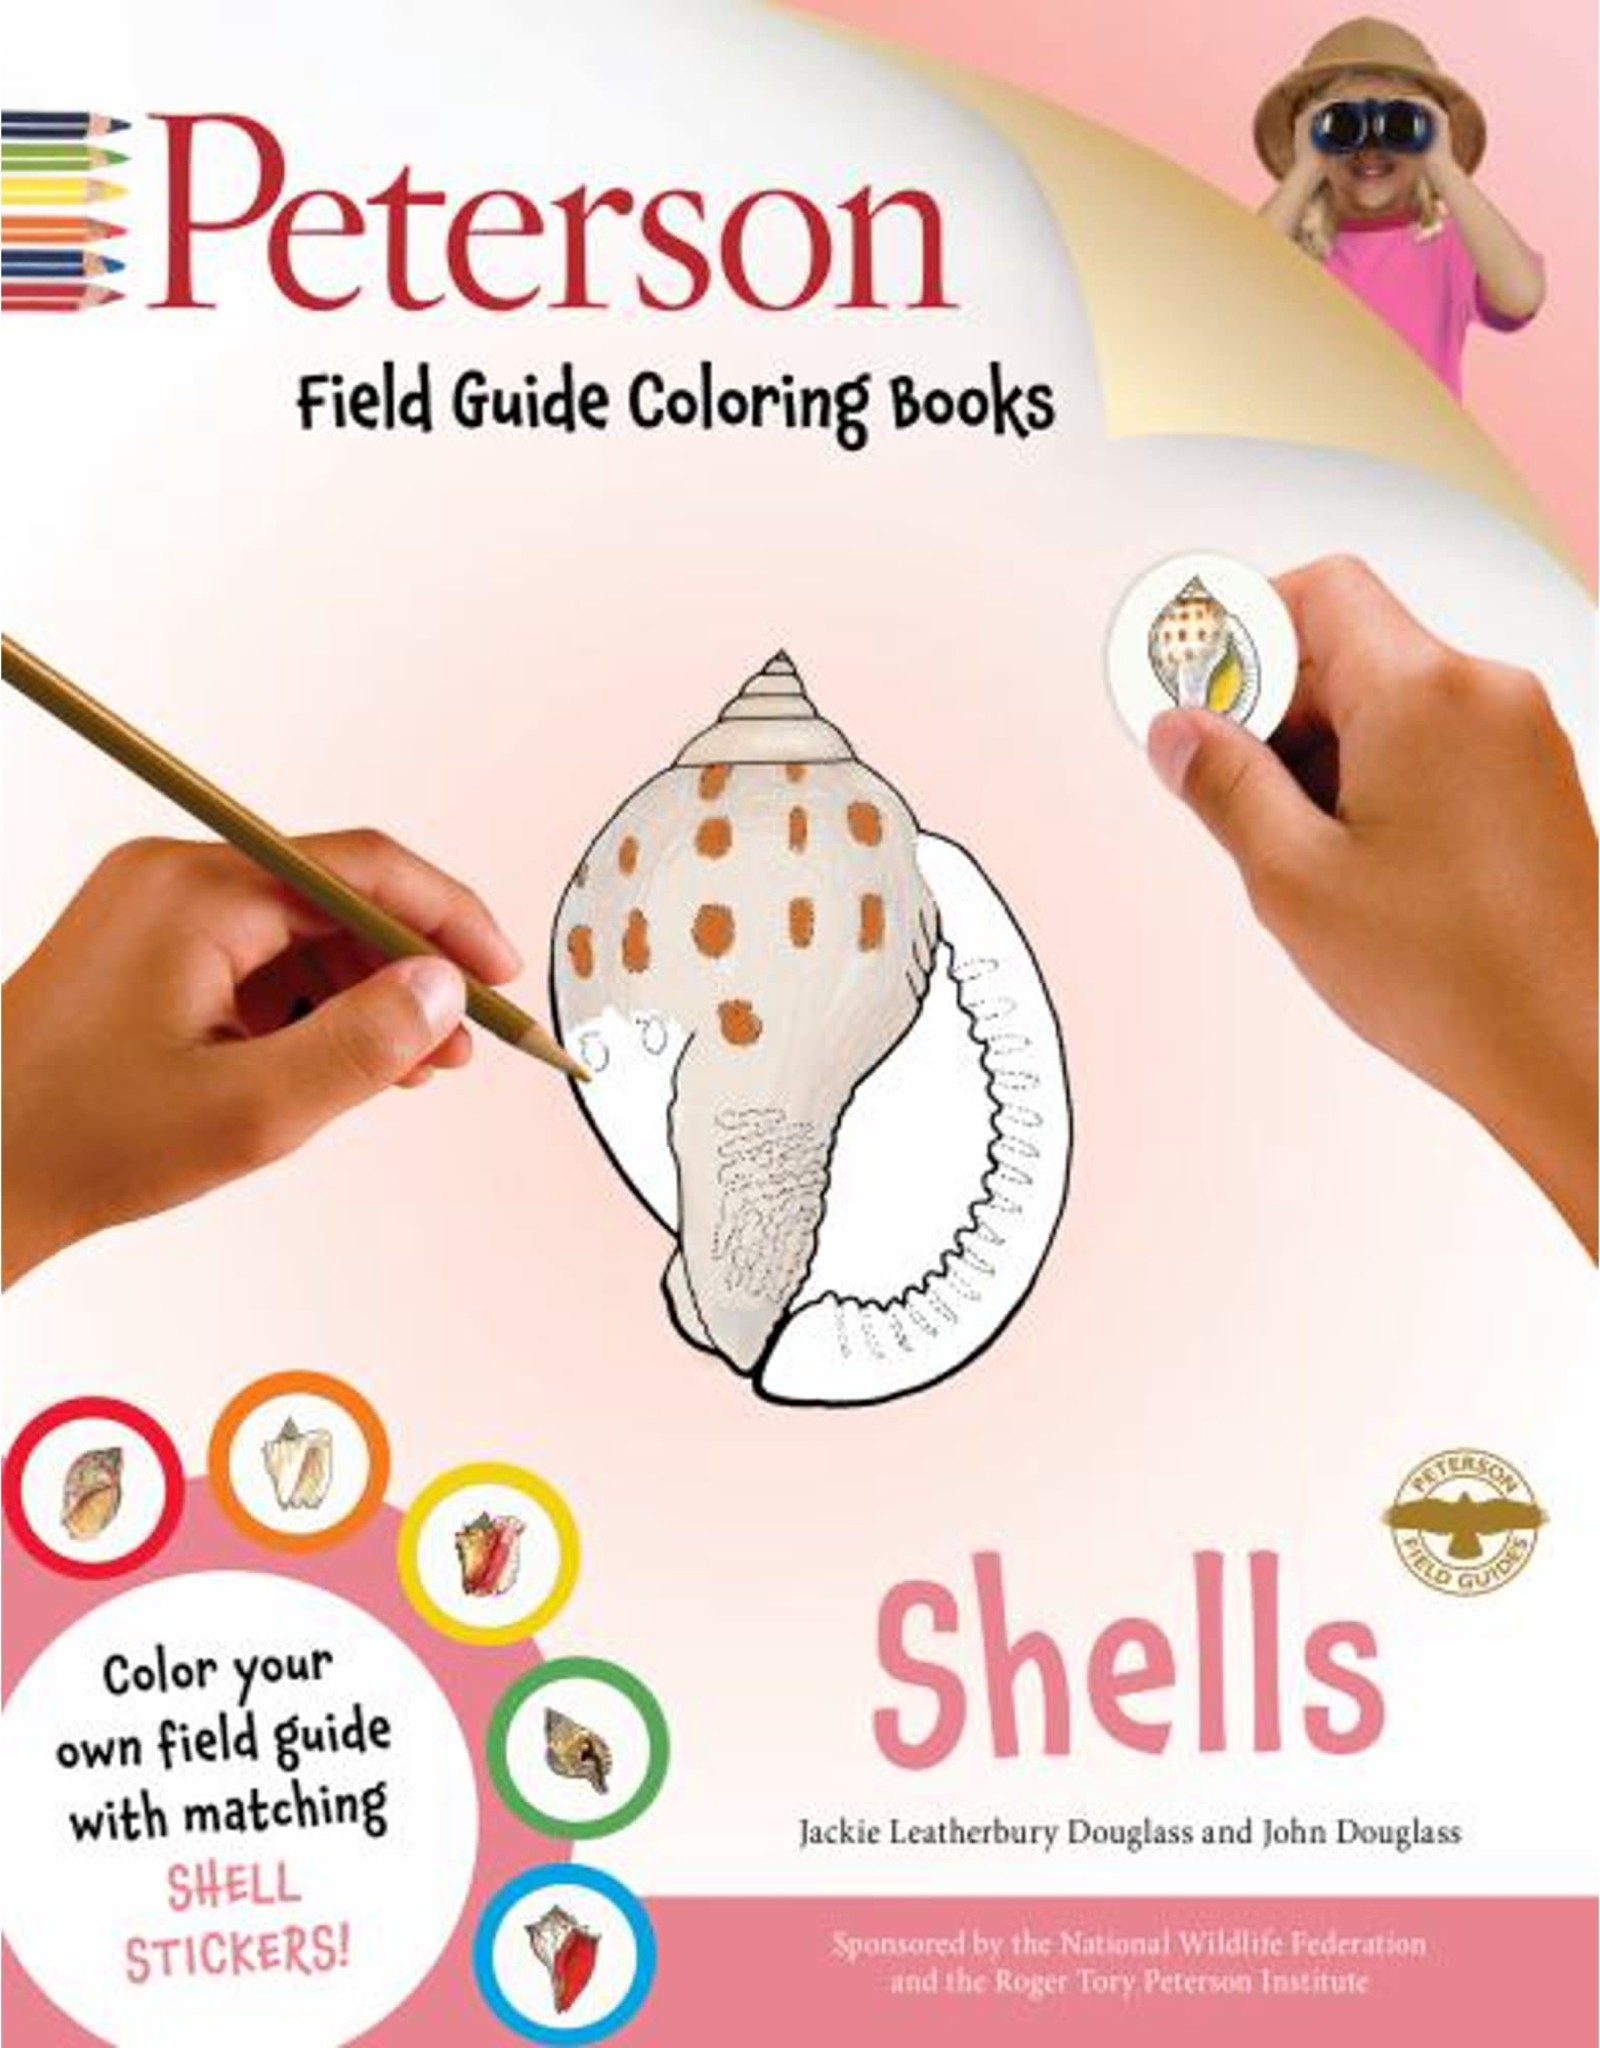 Peterson Shells - Field Guide Coloring Book by Peterson